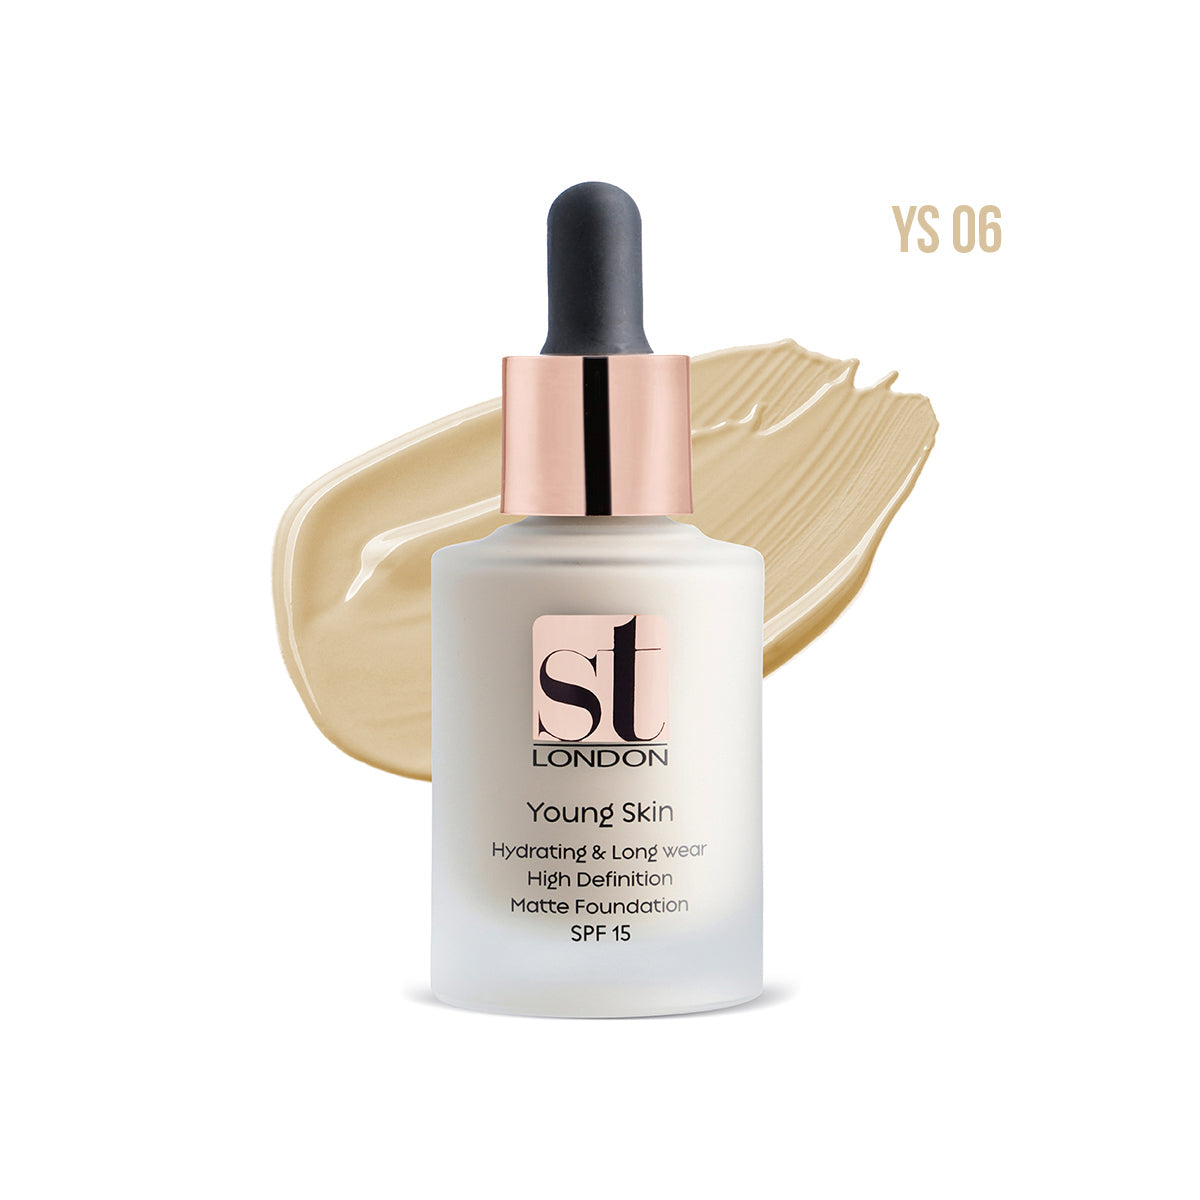 St London - Youthfull Young Skin Foundation - Ys 06